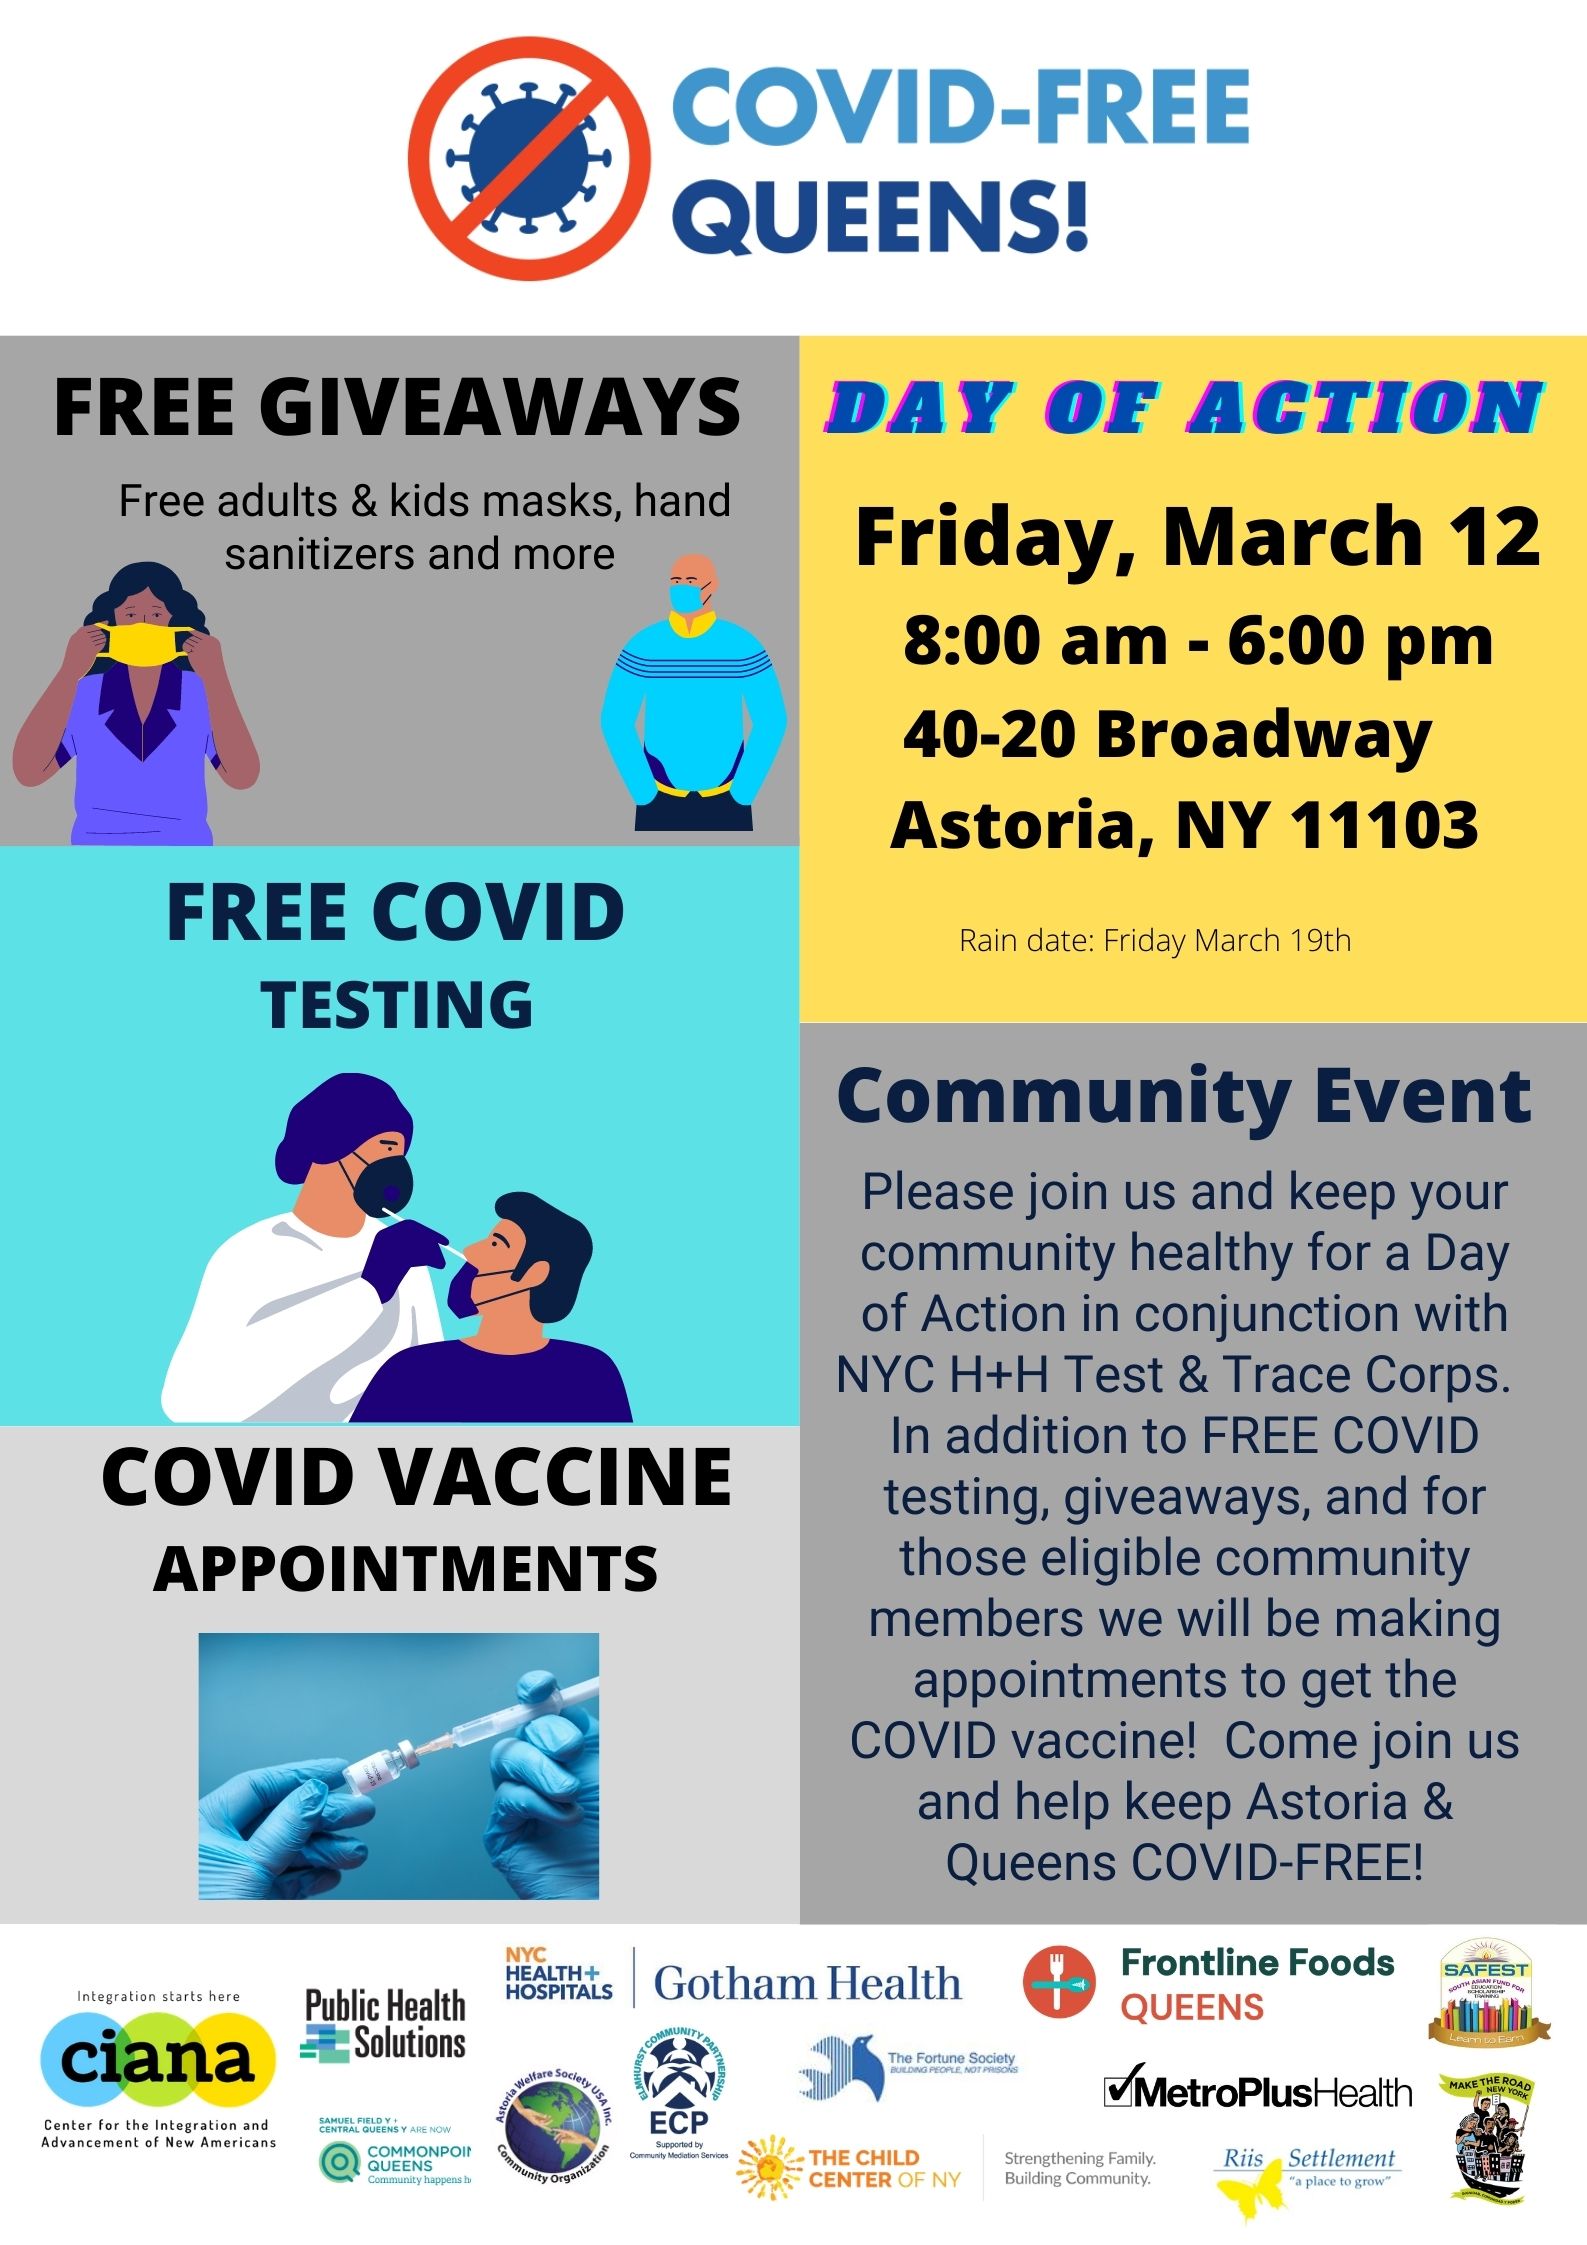 COVID-Free Queens Astoria Day of Action